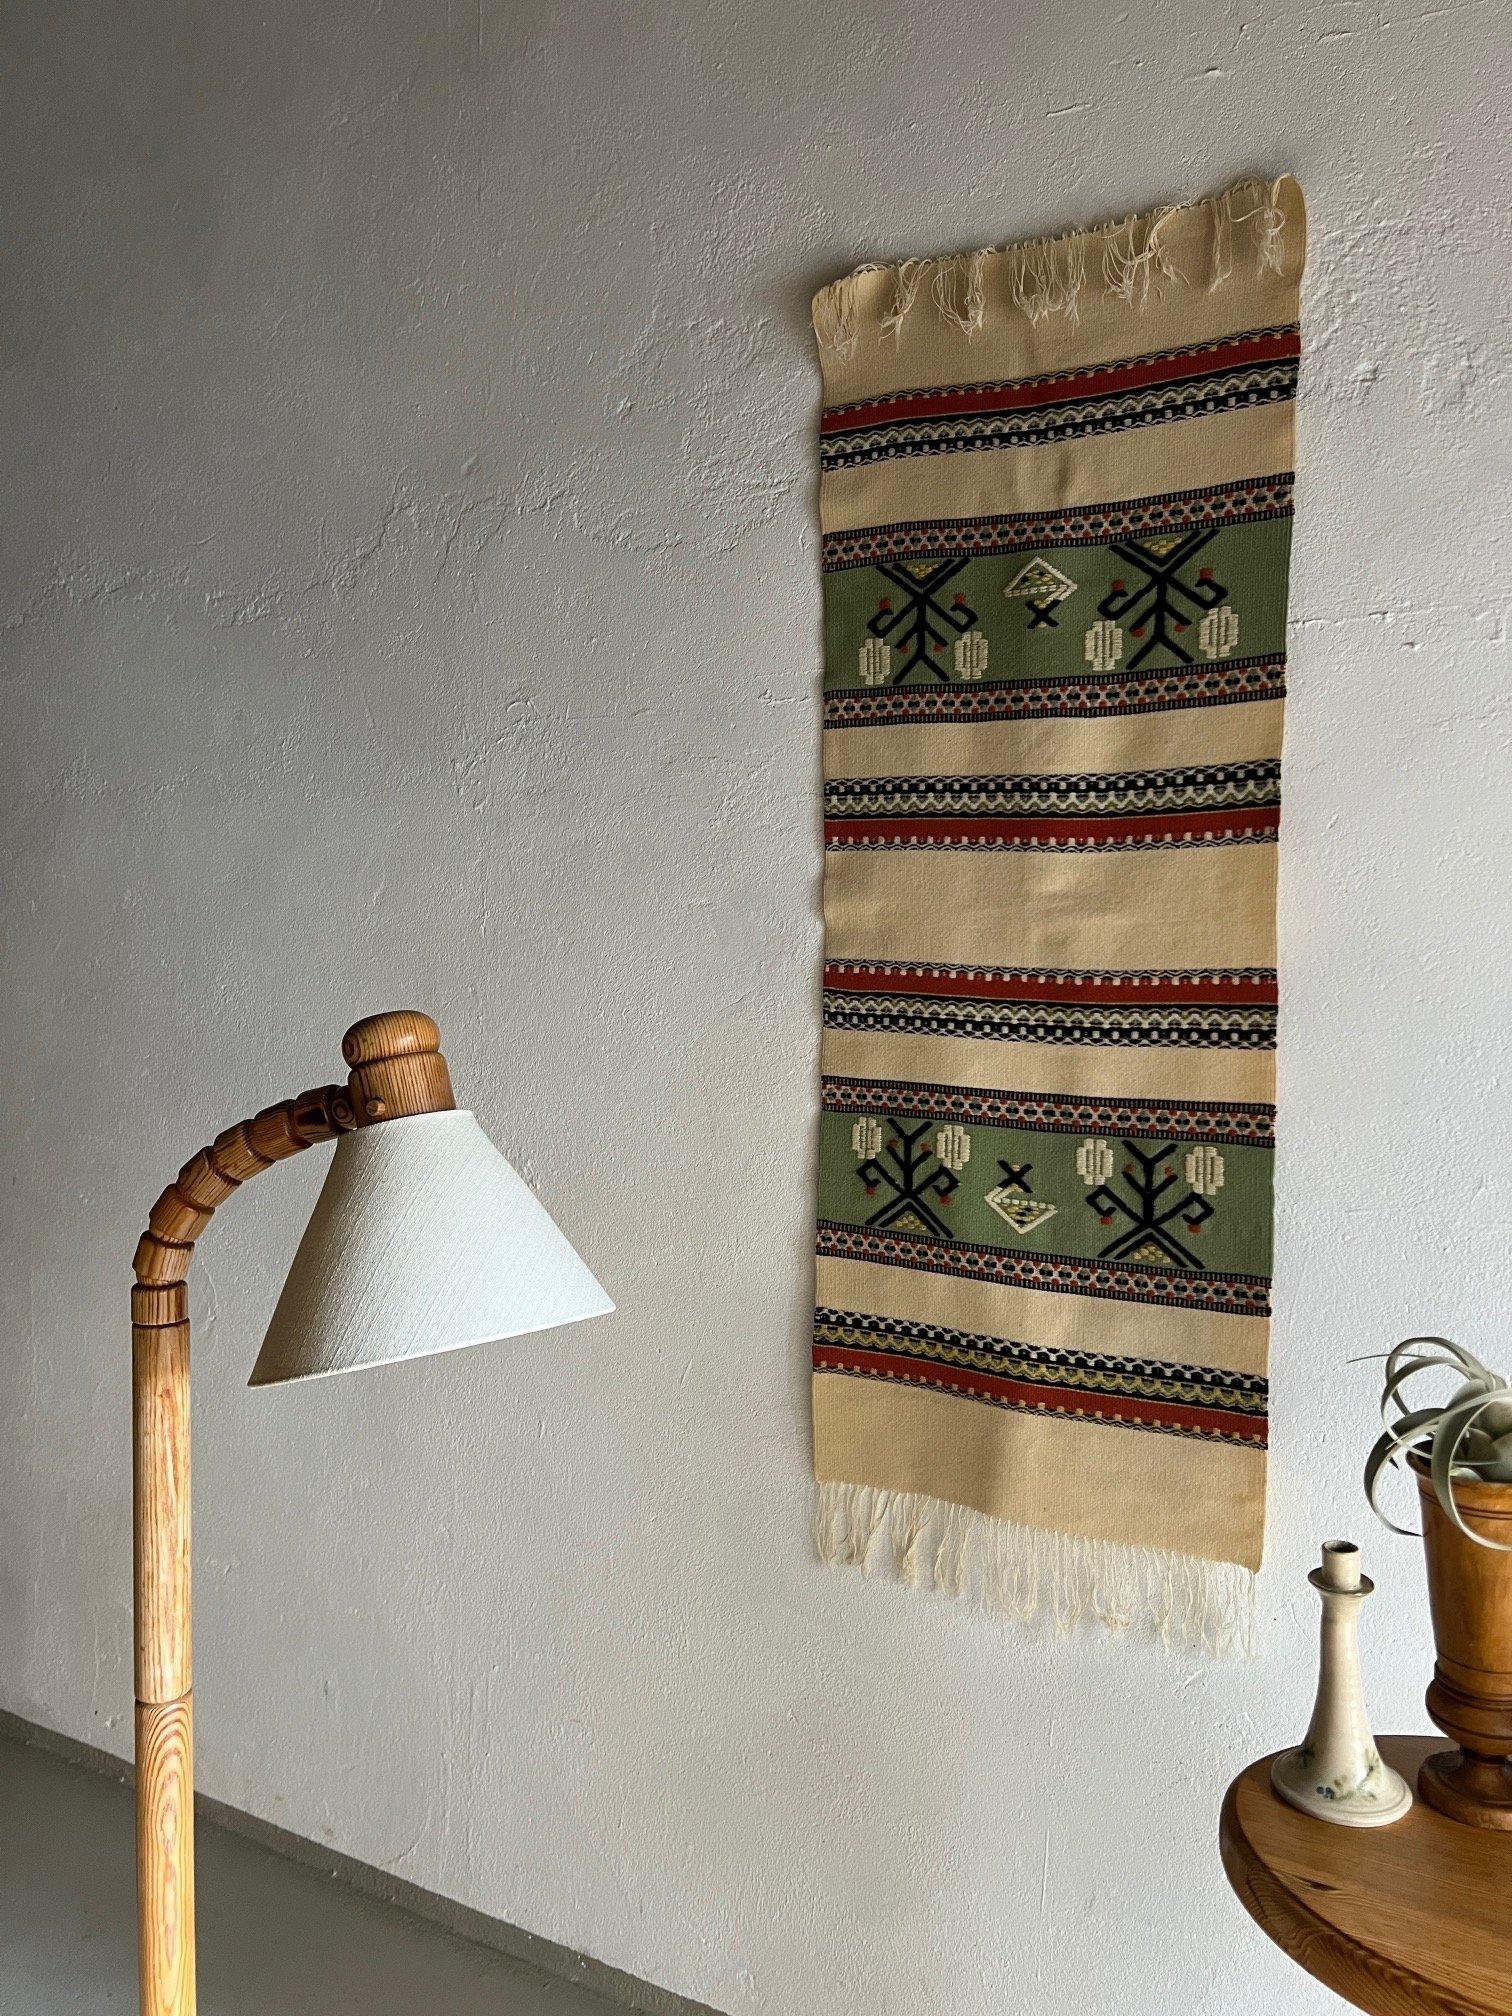 Vintage wool blanket or runner which may be used as a wall decor.

Additional information:
Origin: Sweden
Design period: 1960s
Dimensions: 50 D x 132 W cm
Condition: Good vintage condition